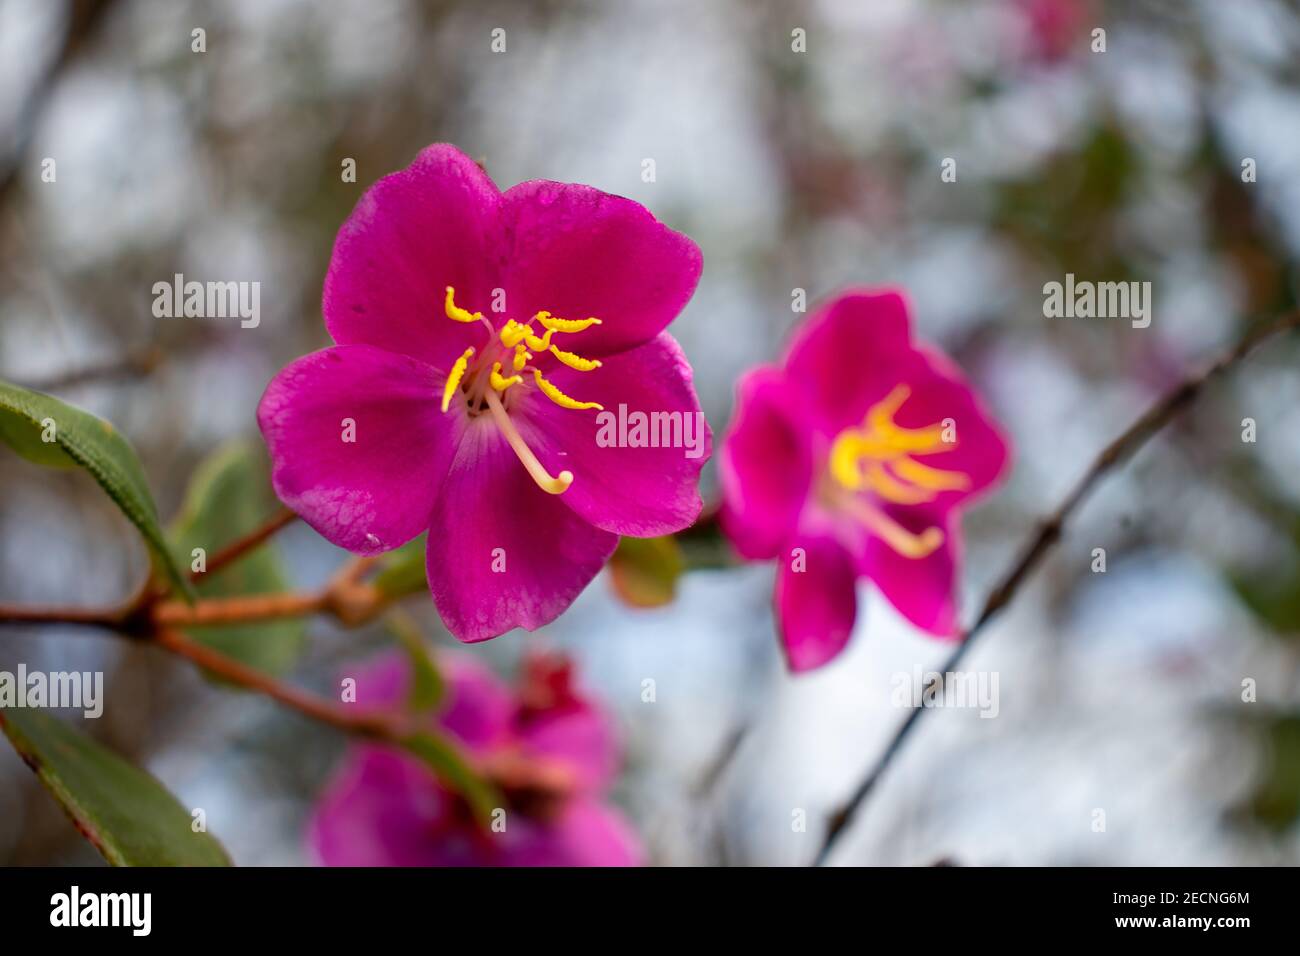 A selective focus shot of a blooming pink flower Stock Photo